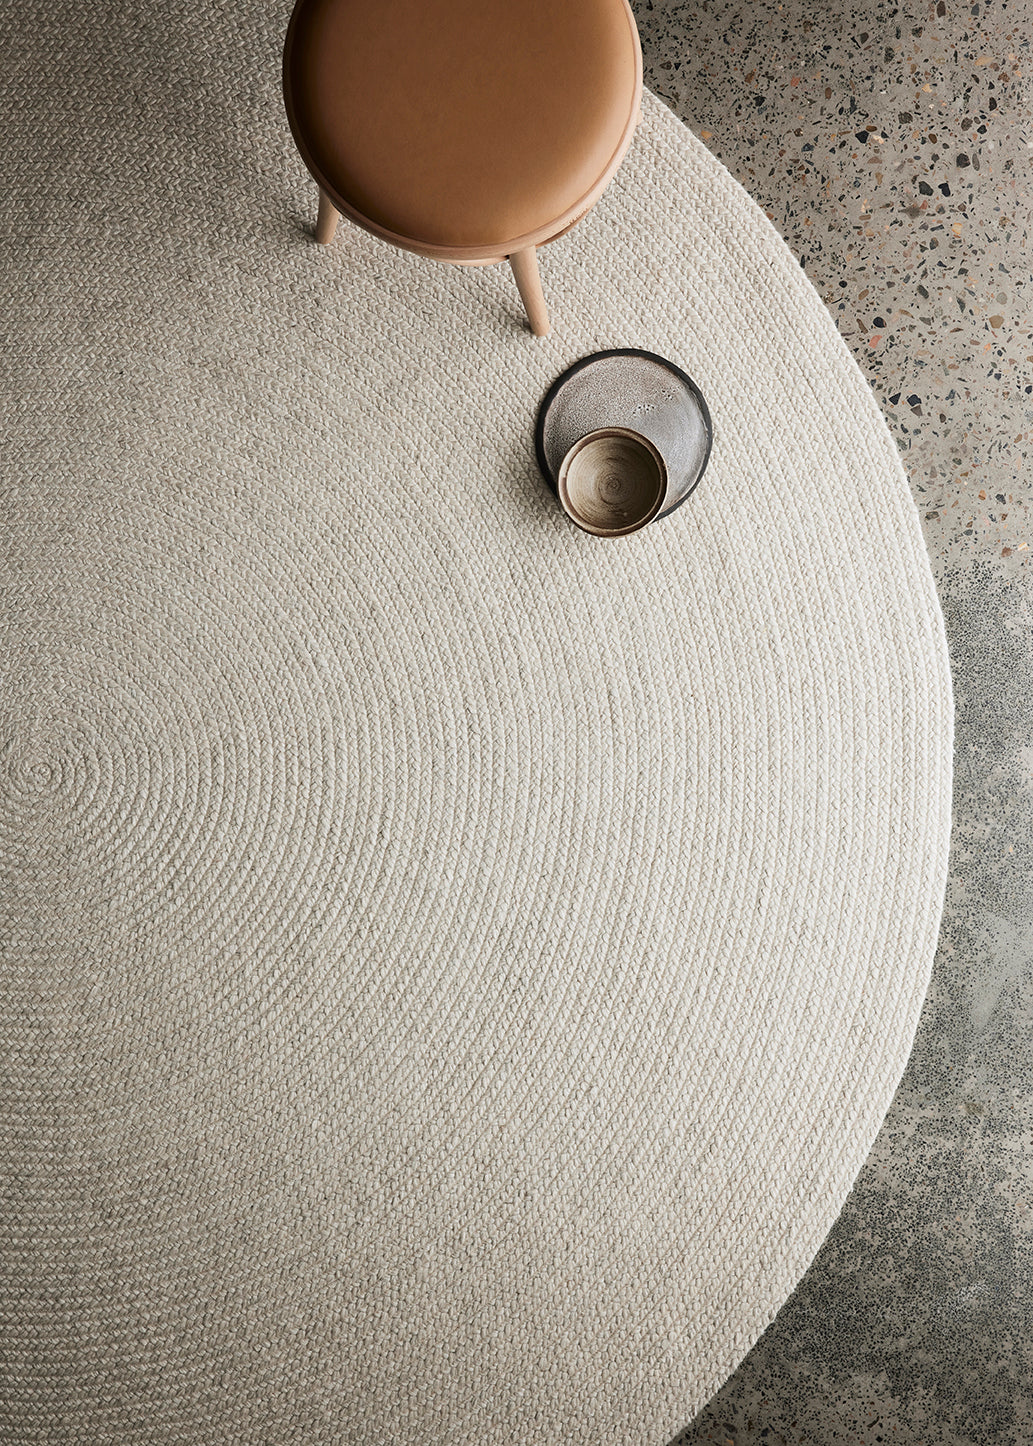 Round Rugs - The Ivy House